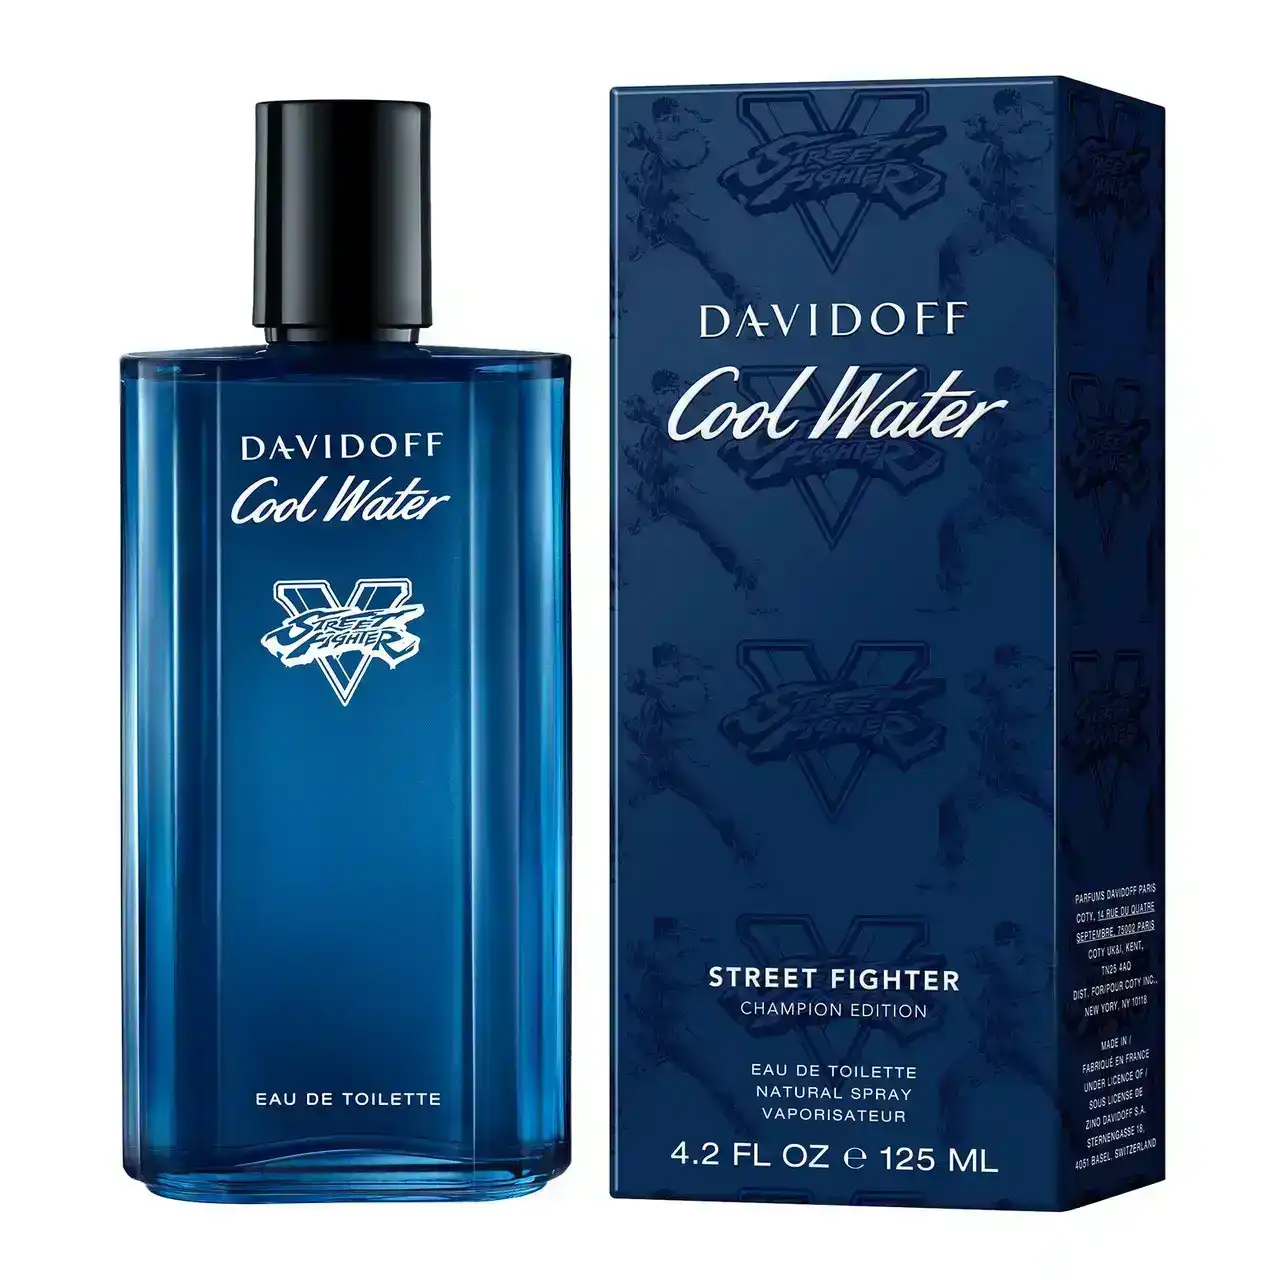 Coolwater Street Fighter 125ml EDT By Davidoff (Mens)